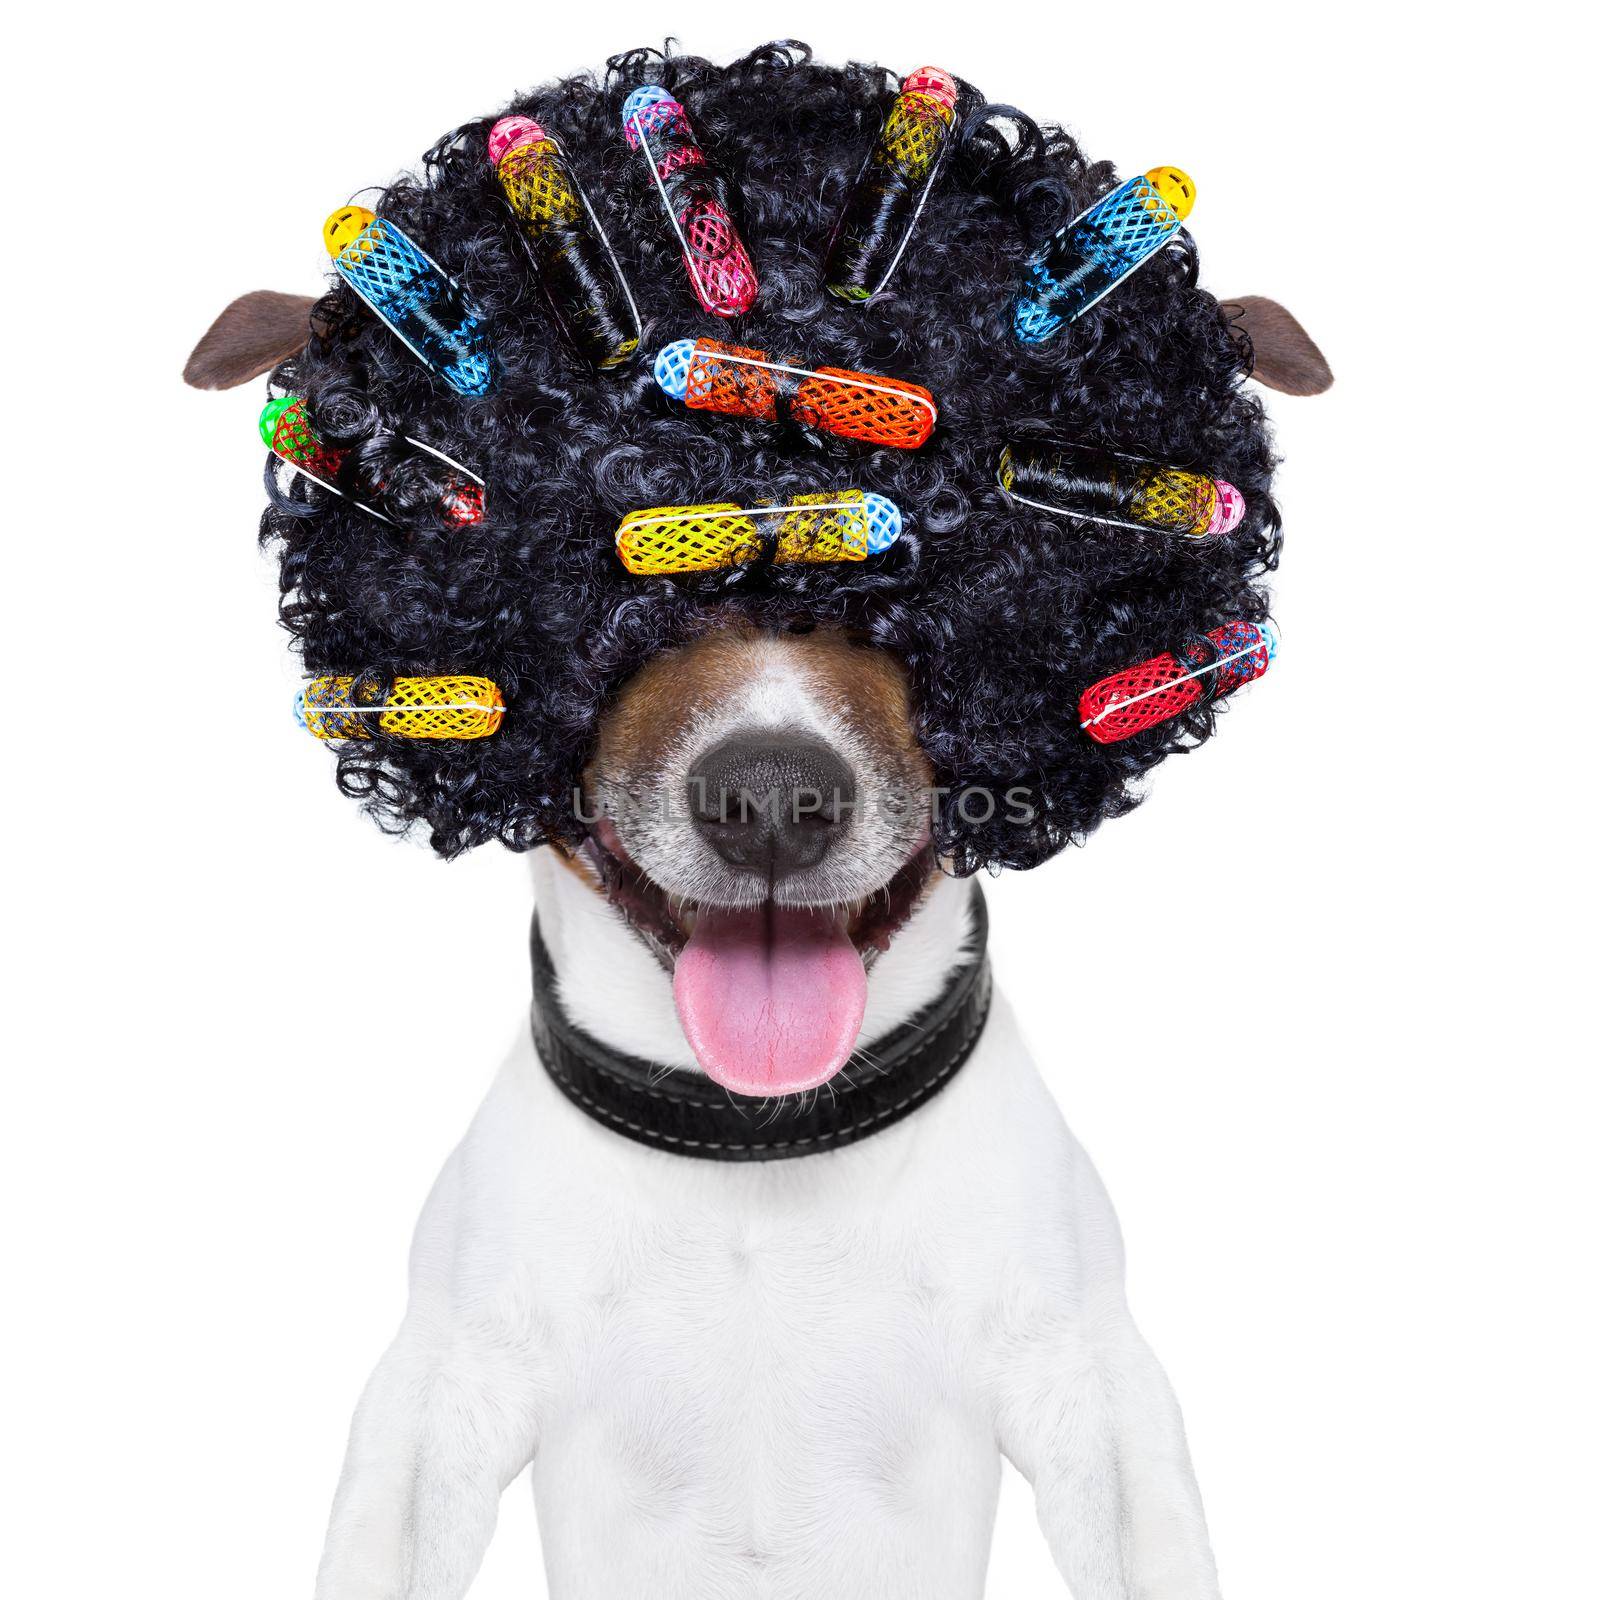 dog with a crazy curly afro look wig and hair curlers